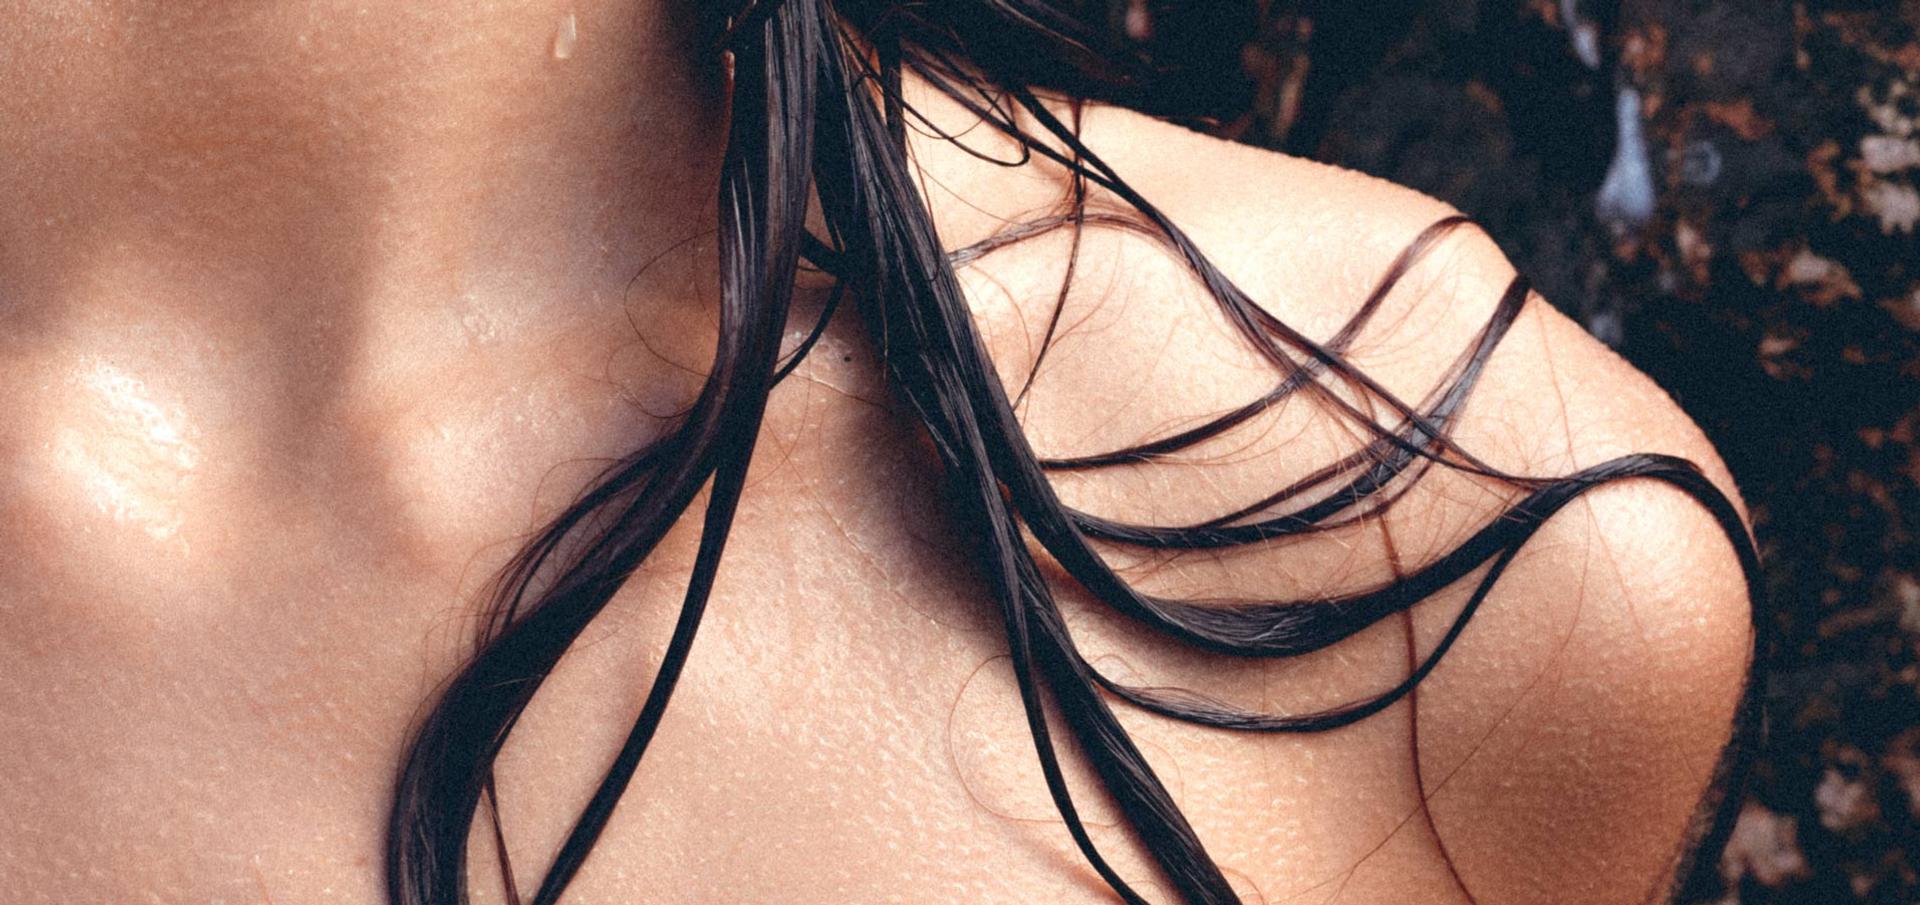 Partial neck and shoulder close up of a woman with wet hair strands on her shoulder